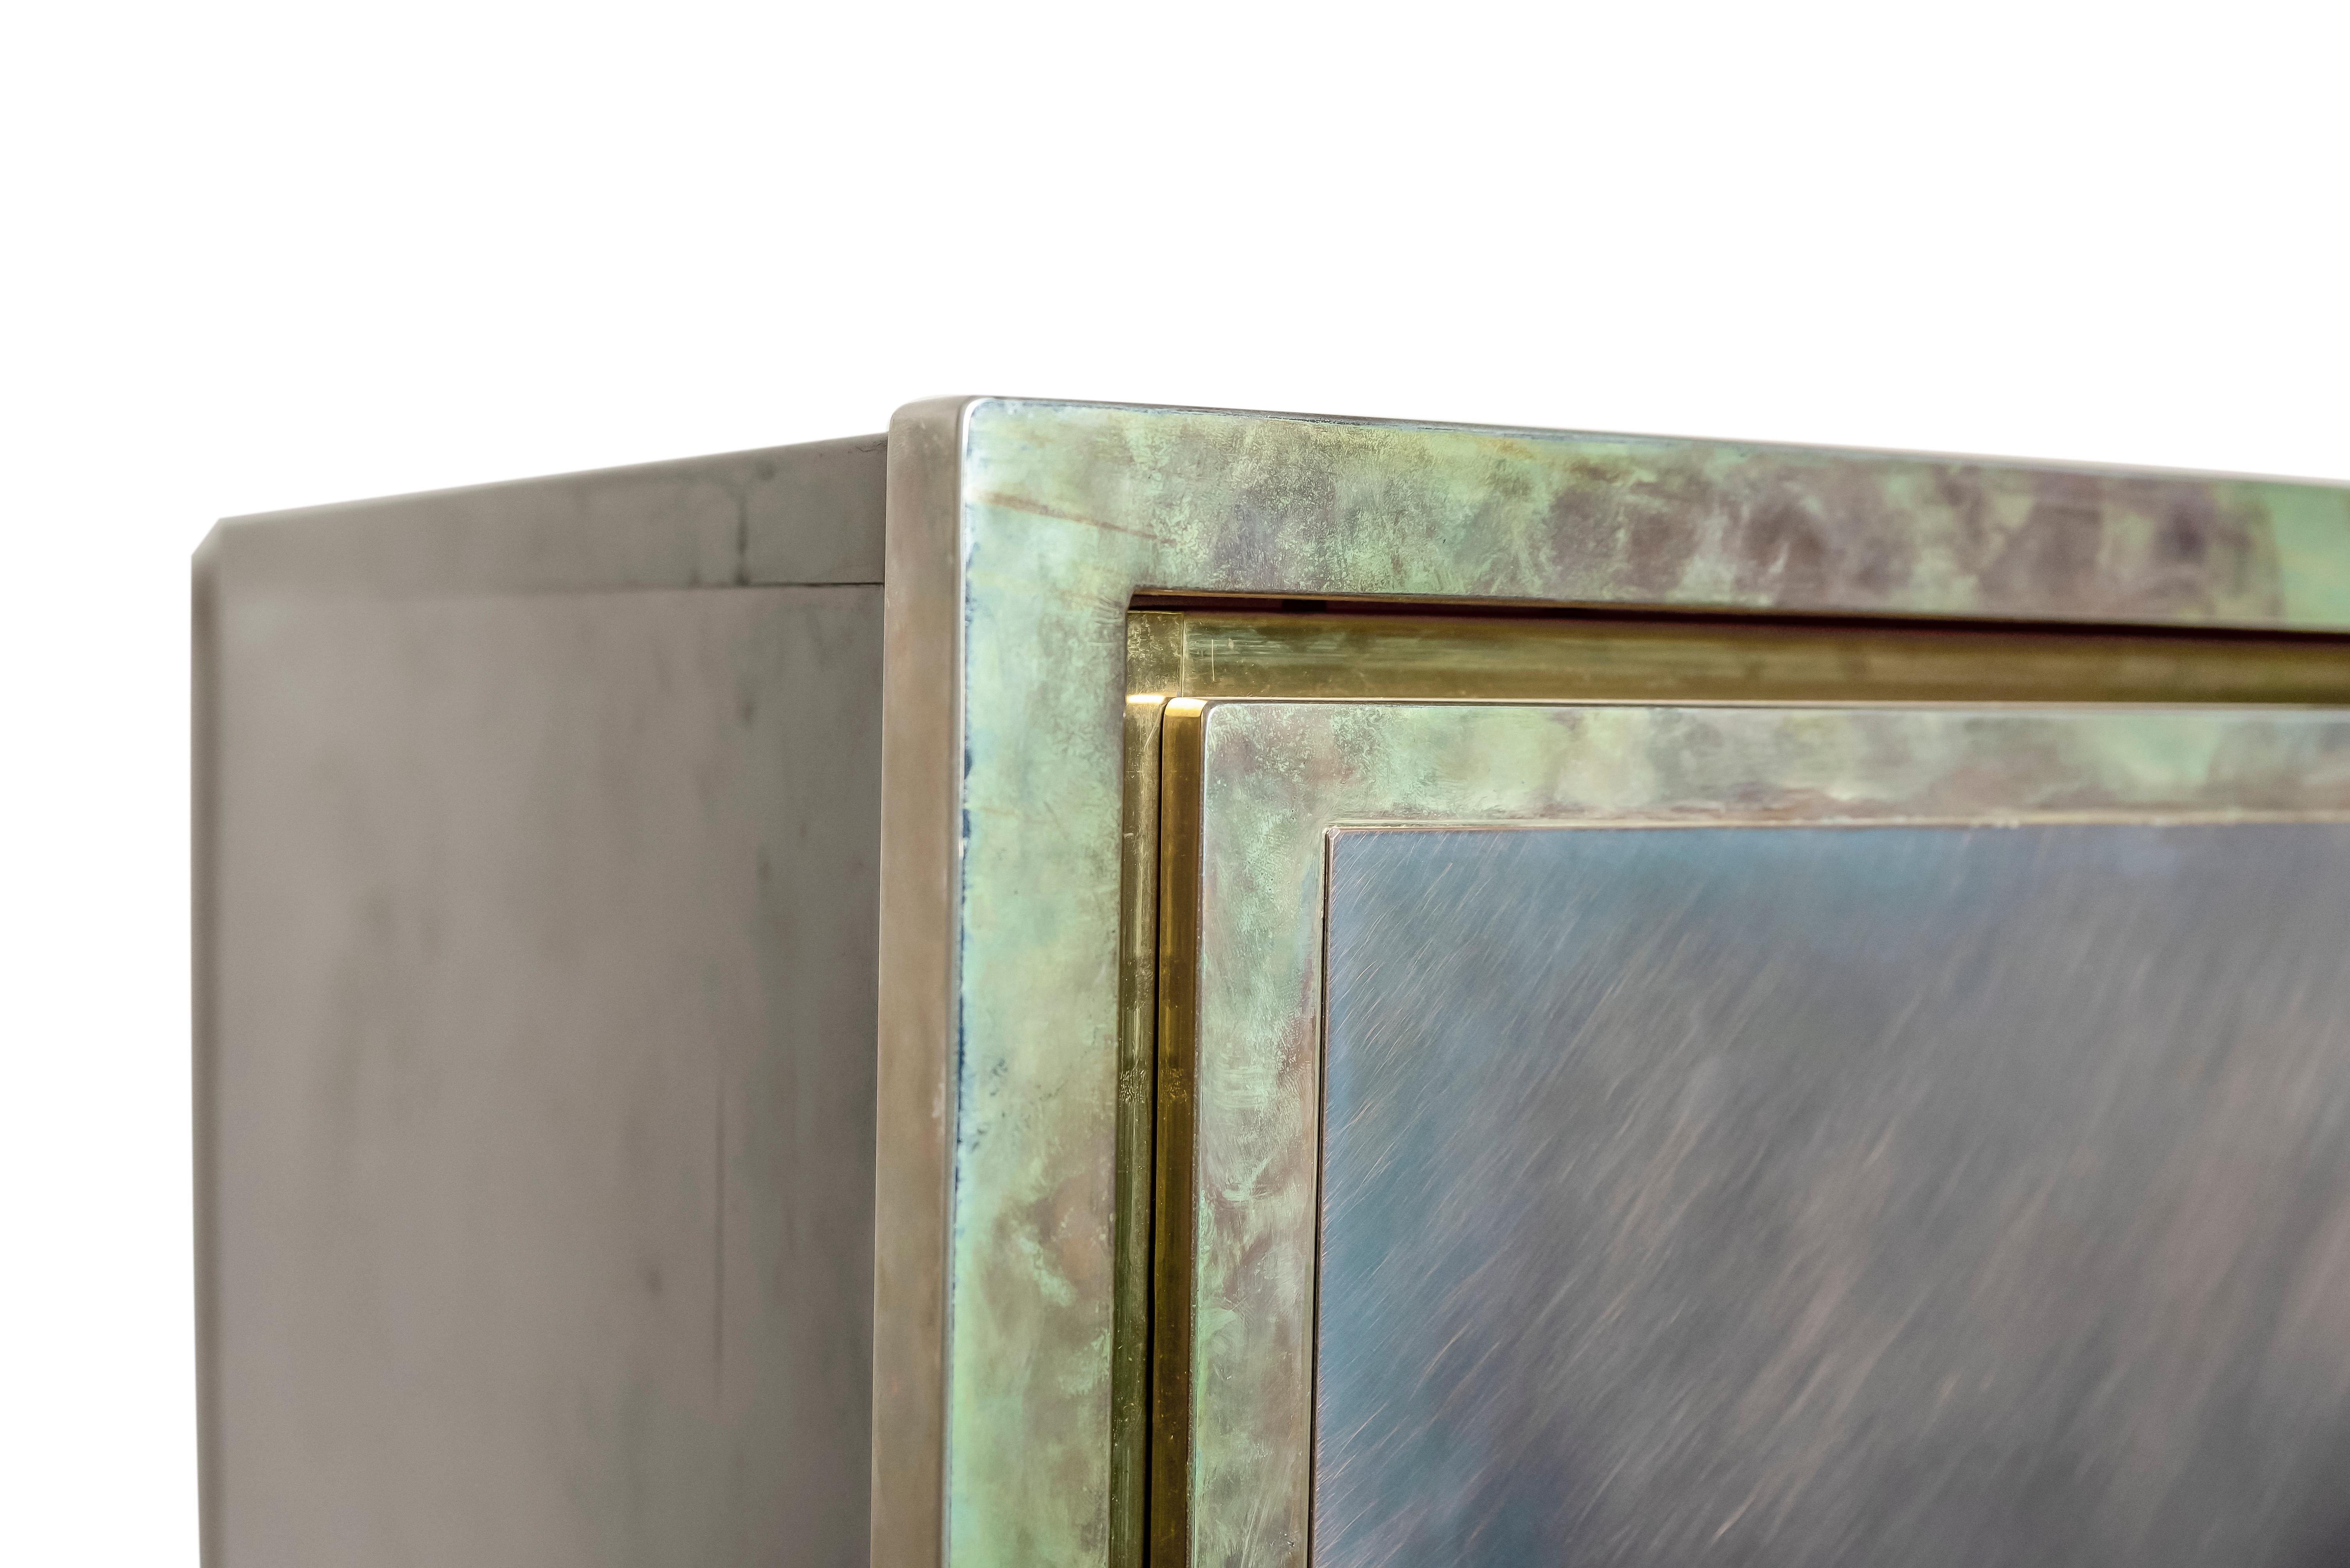 20th century french Maison Jansen brass and patinated brass bar or cabinet. Brushed rosemetal effect on the door and side pannels.